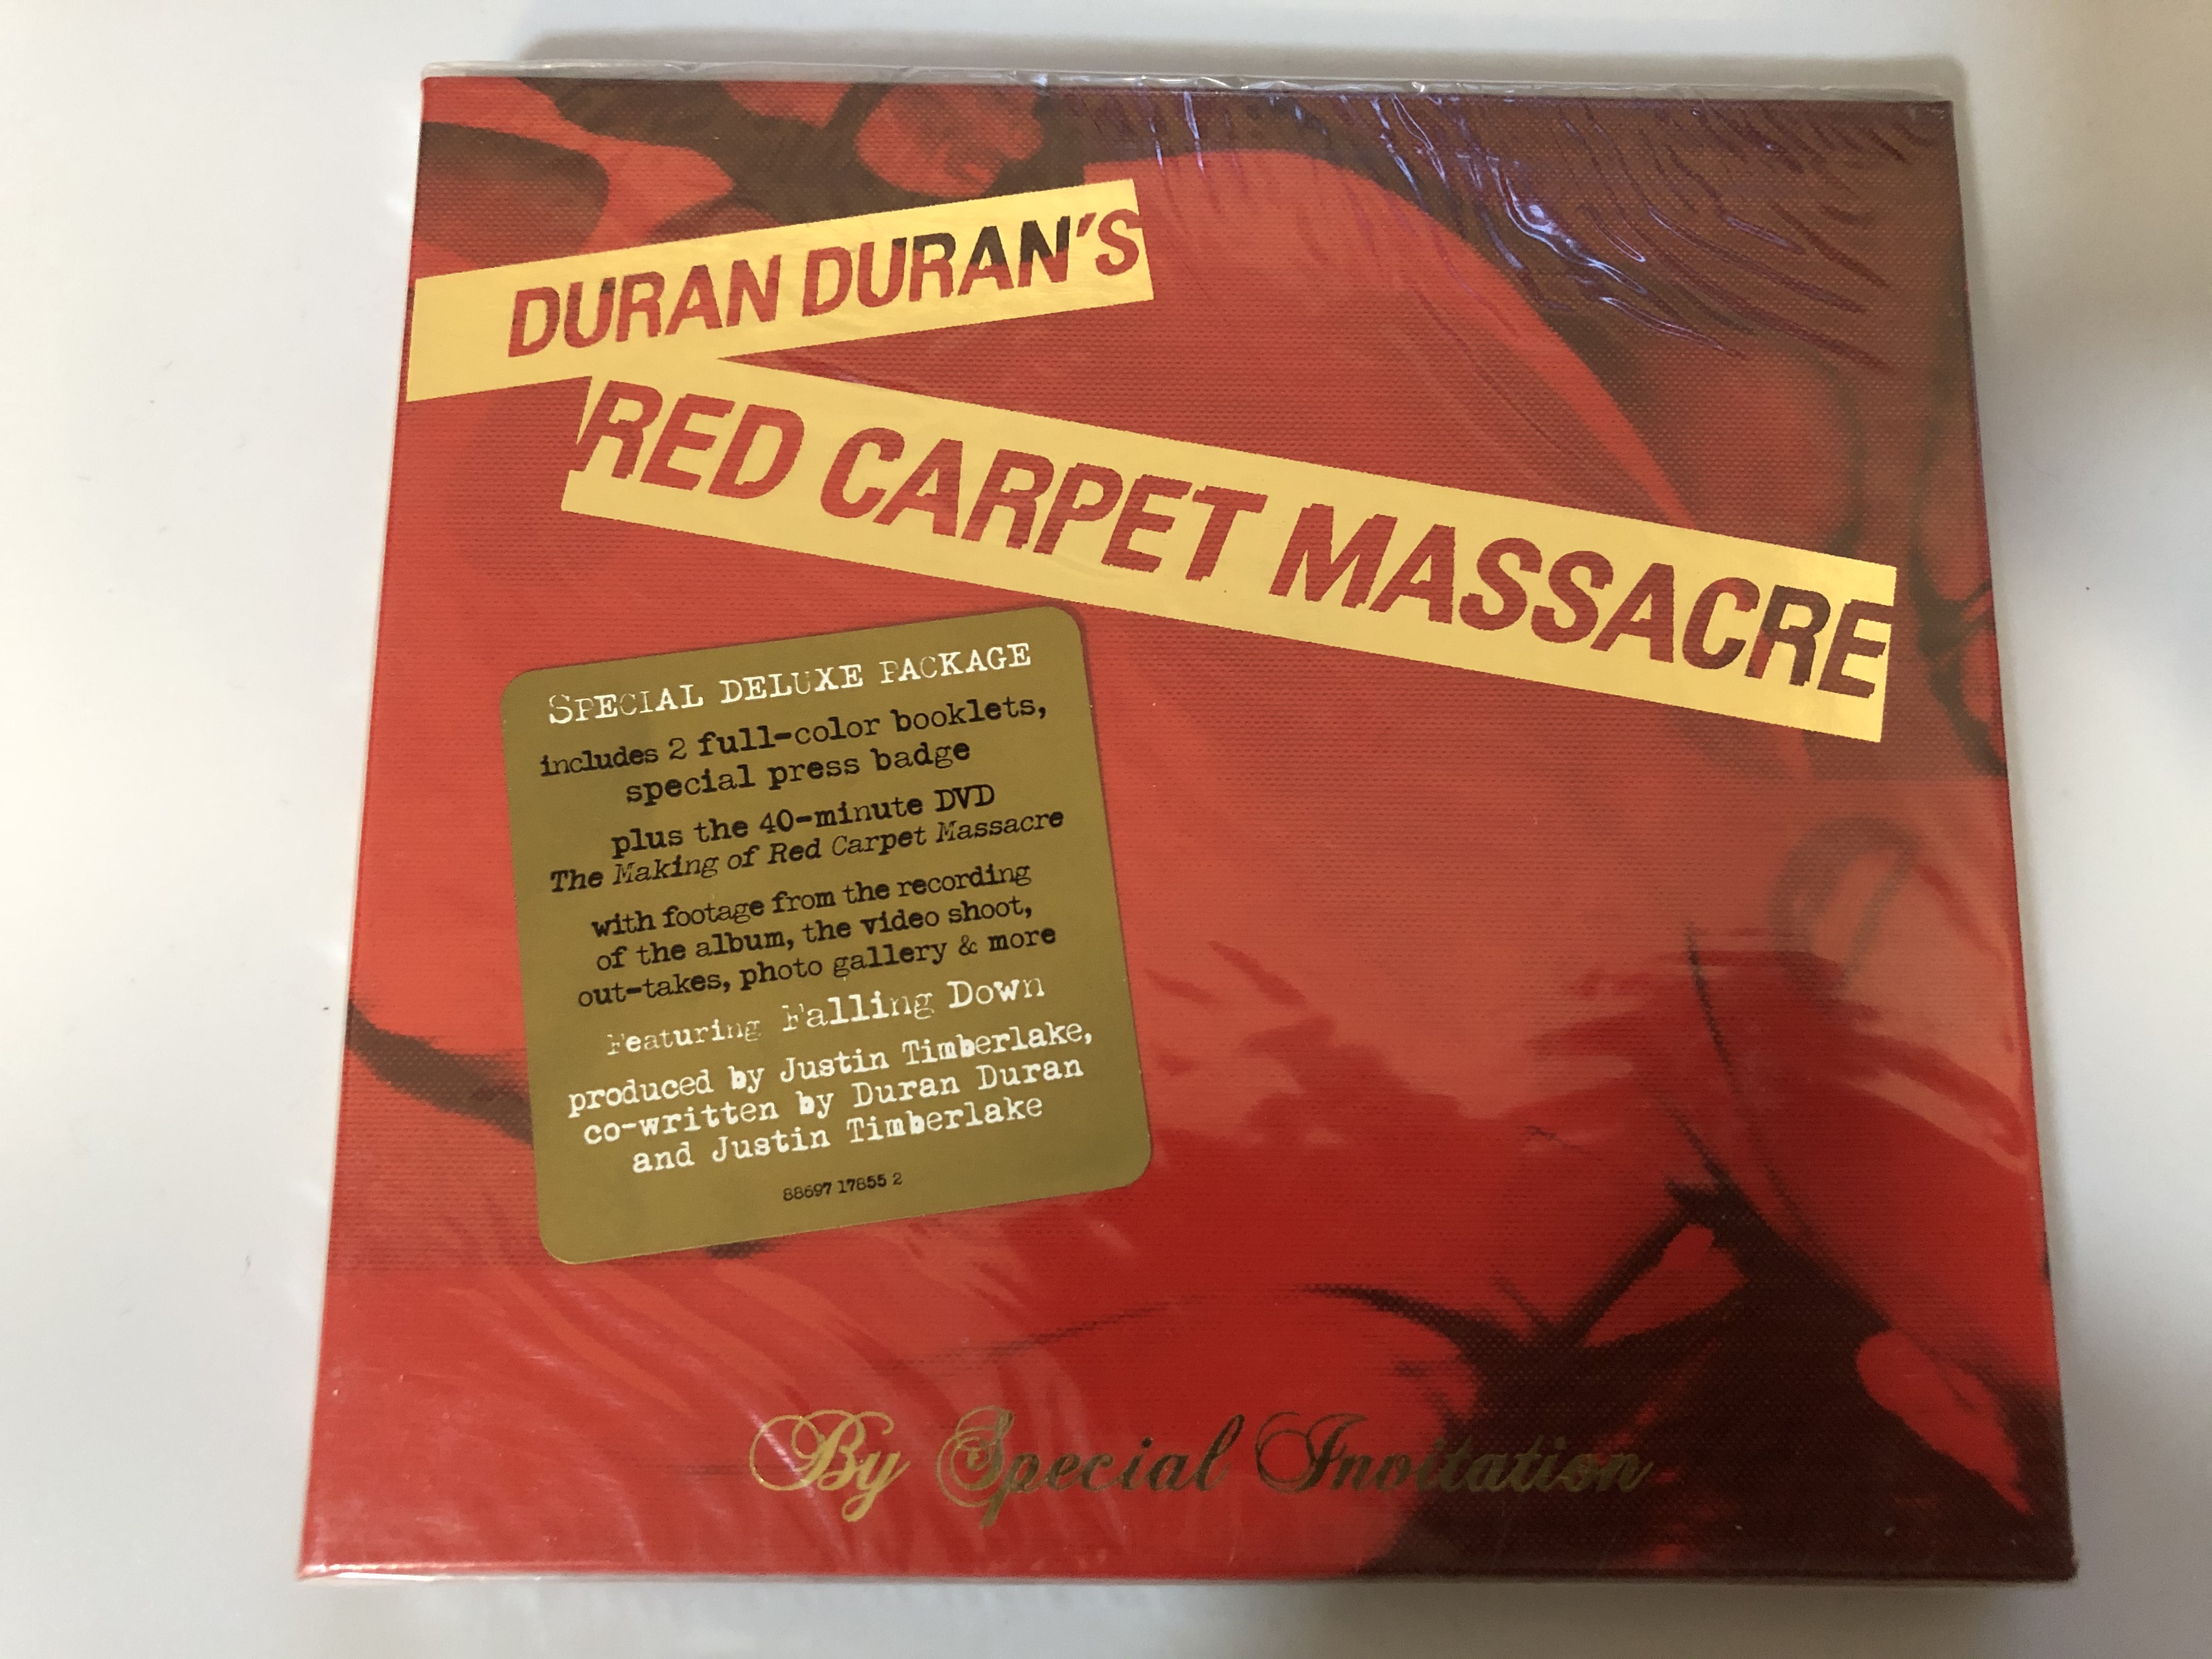 duran-duran-red-carpet-massacre-special-deluxe-package-includes-2-full-color-booklets-special-press-badge-plus-the-40-minute-dvd-the-making-of-red-carpet-massacre-epic-audio-cd-dv-1-.jpg